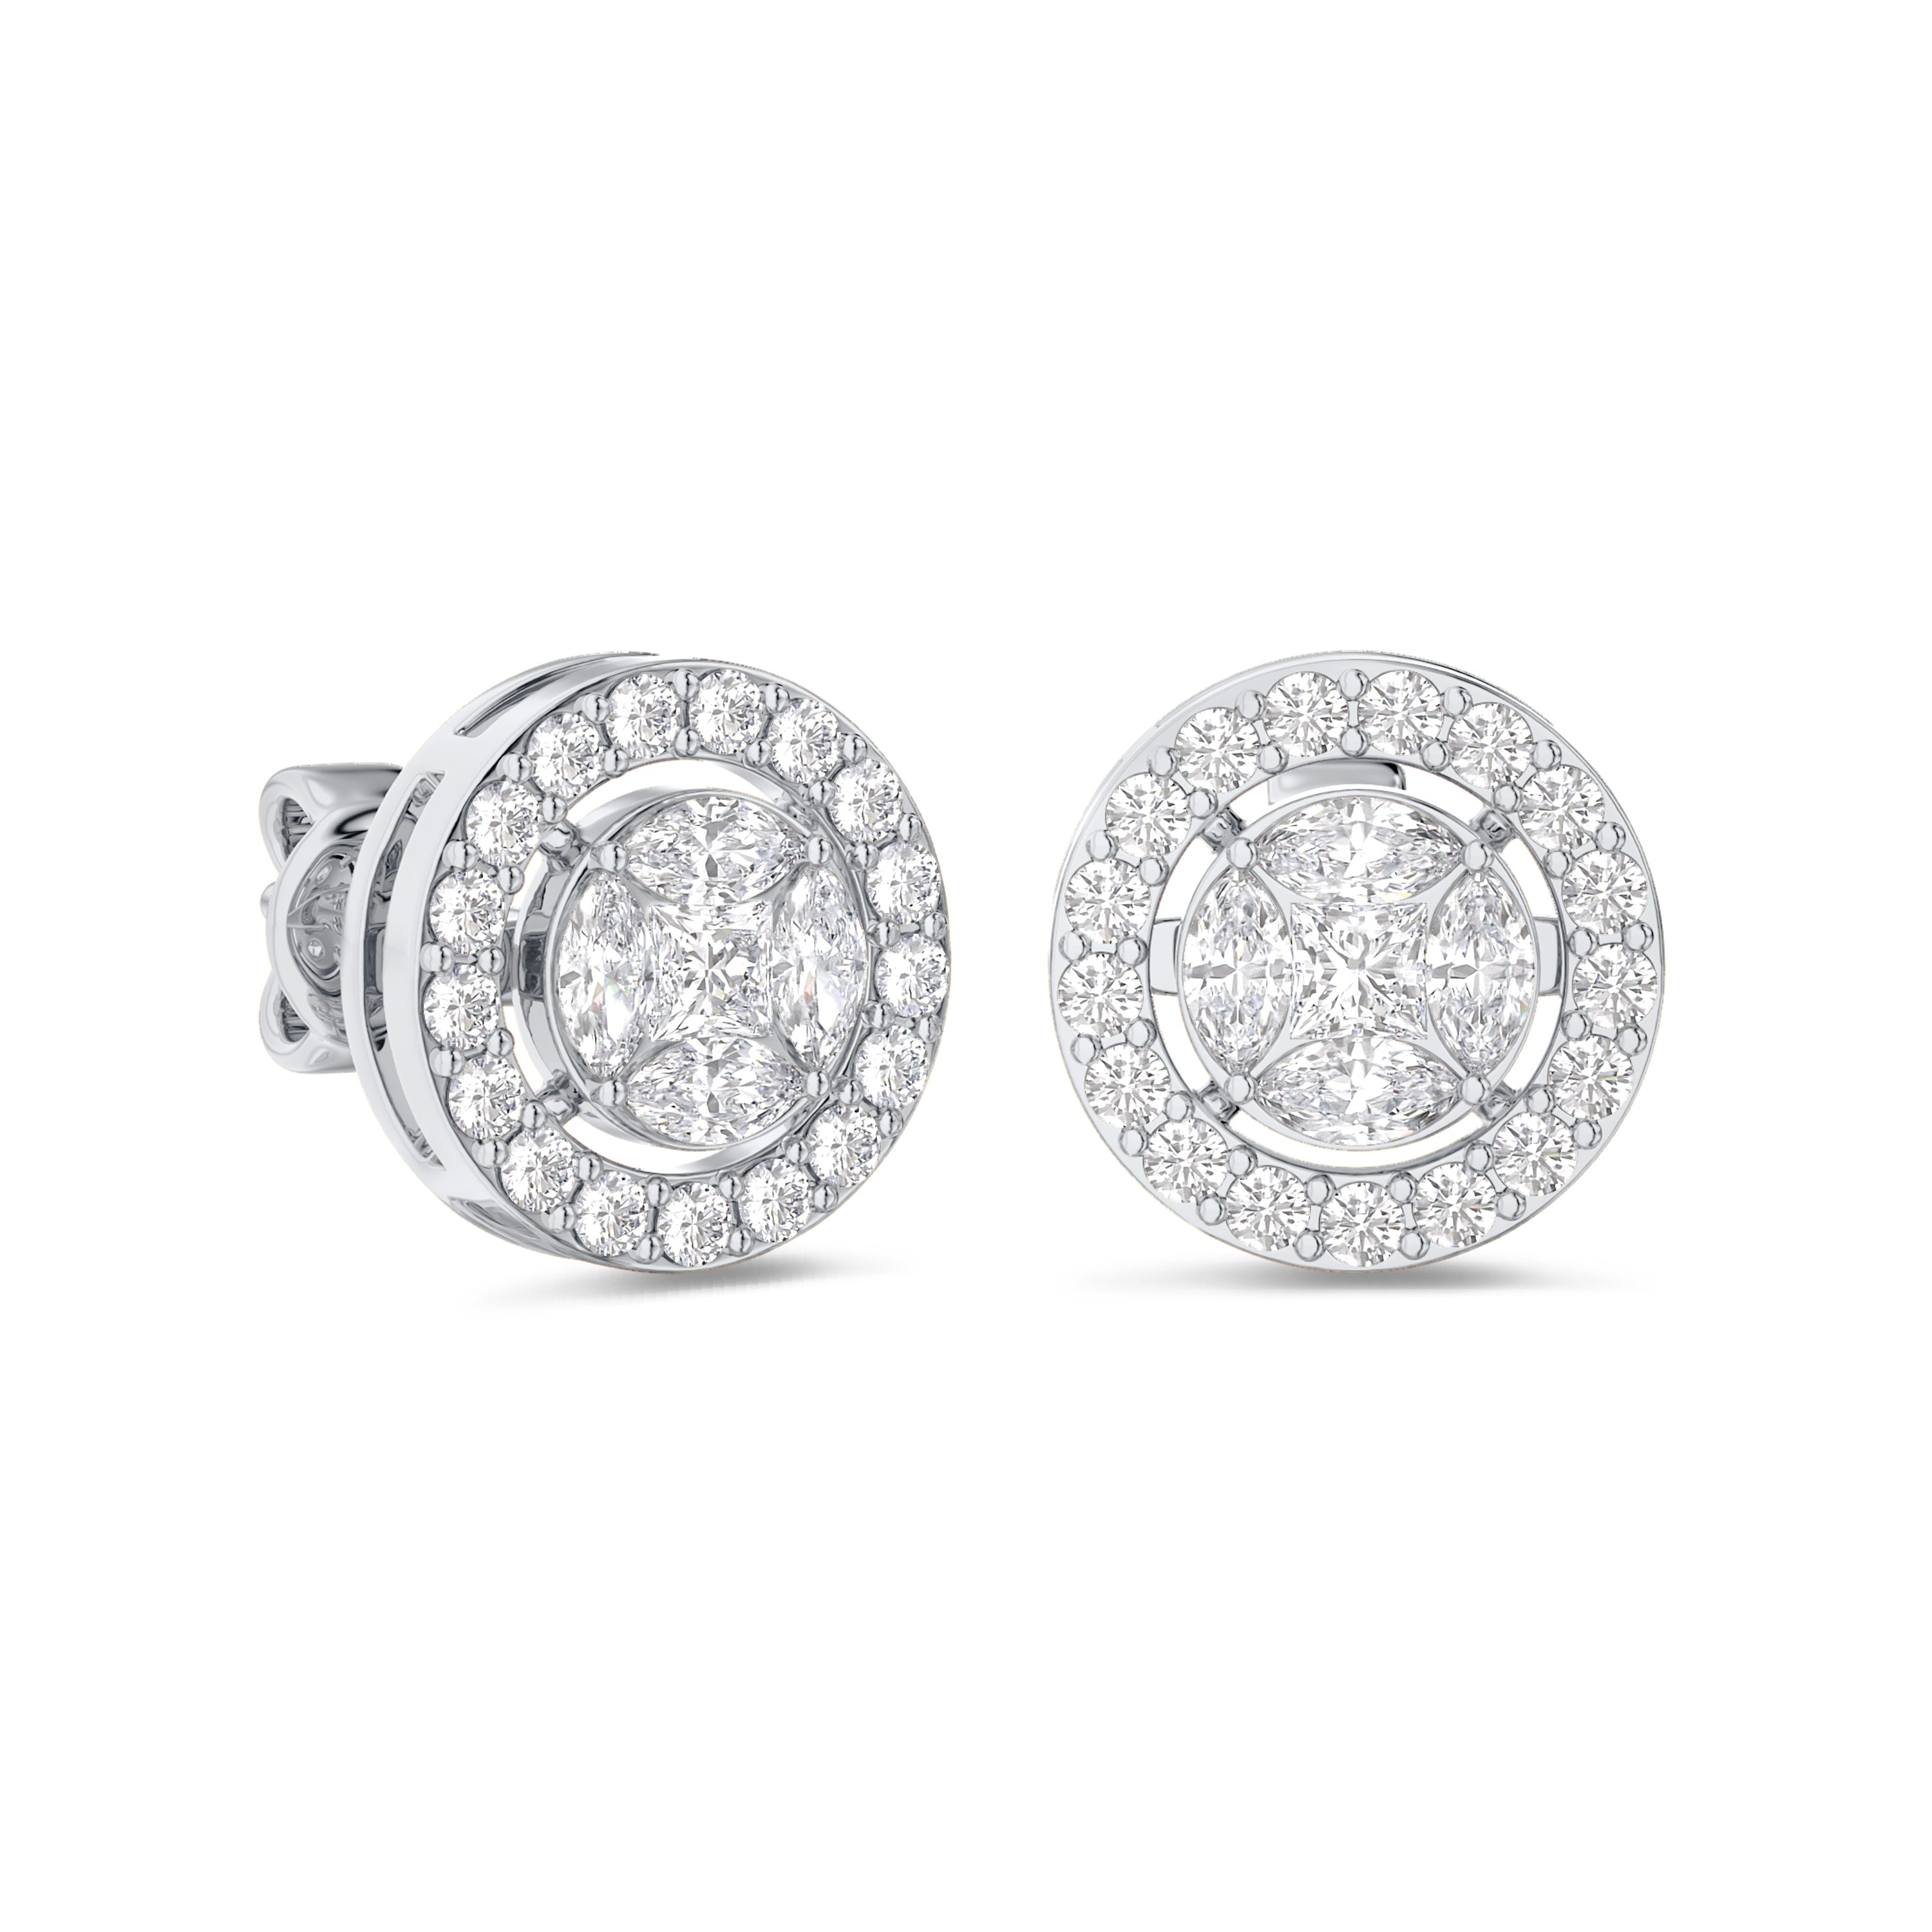 Round cluster diamond earrings in 18k gold, 0.72 carats, F-G color, VS-SI clarity, white gold #gold_white